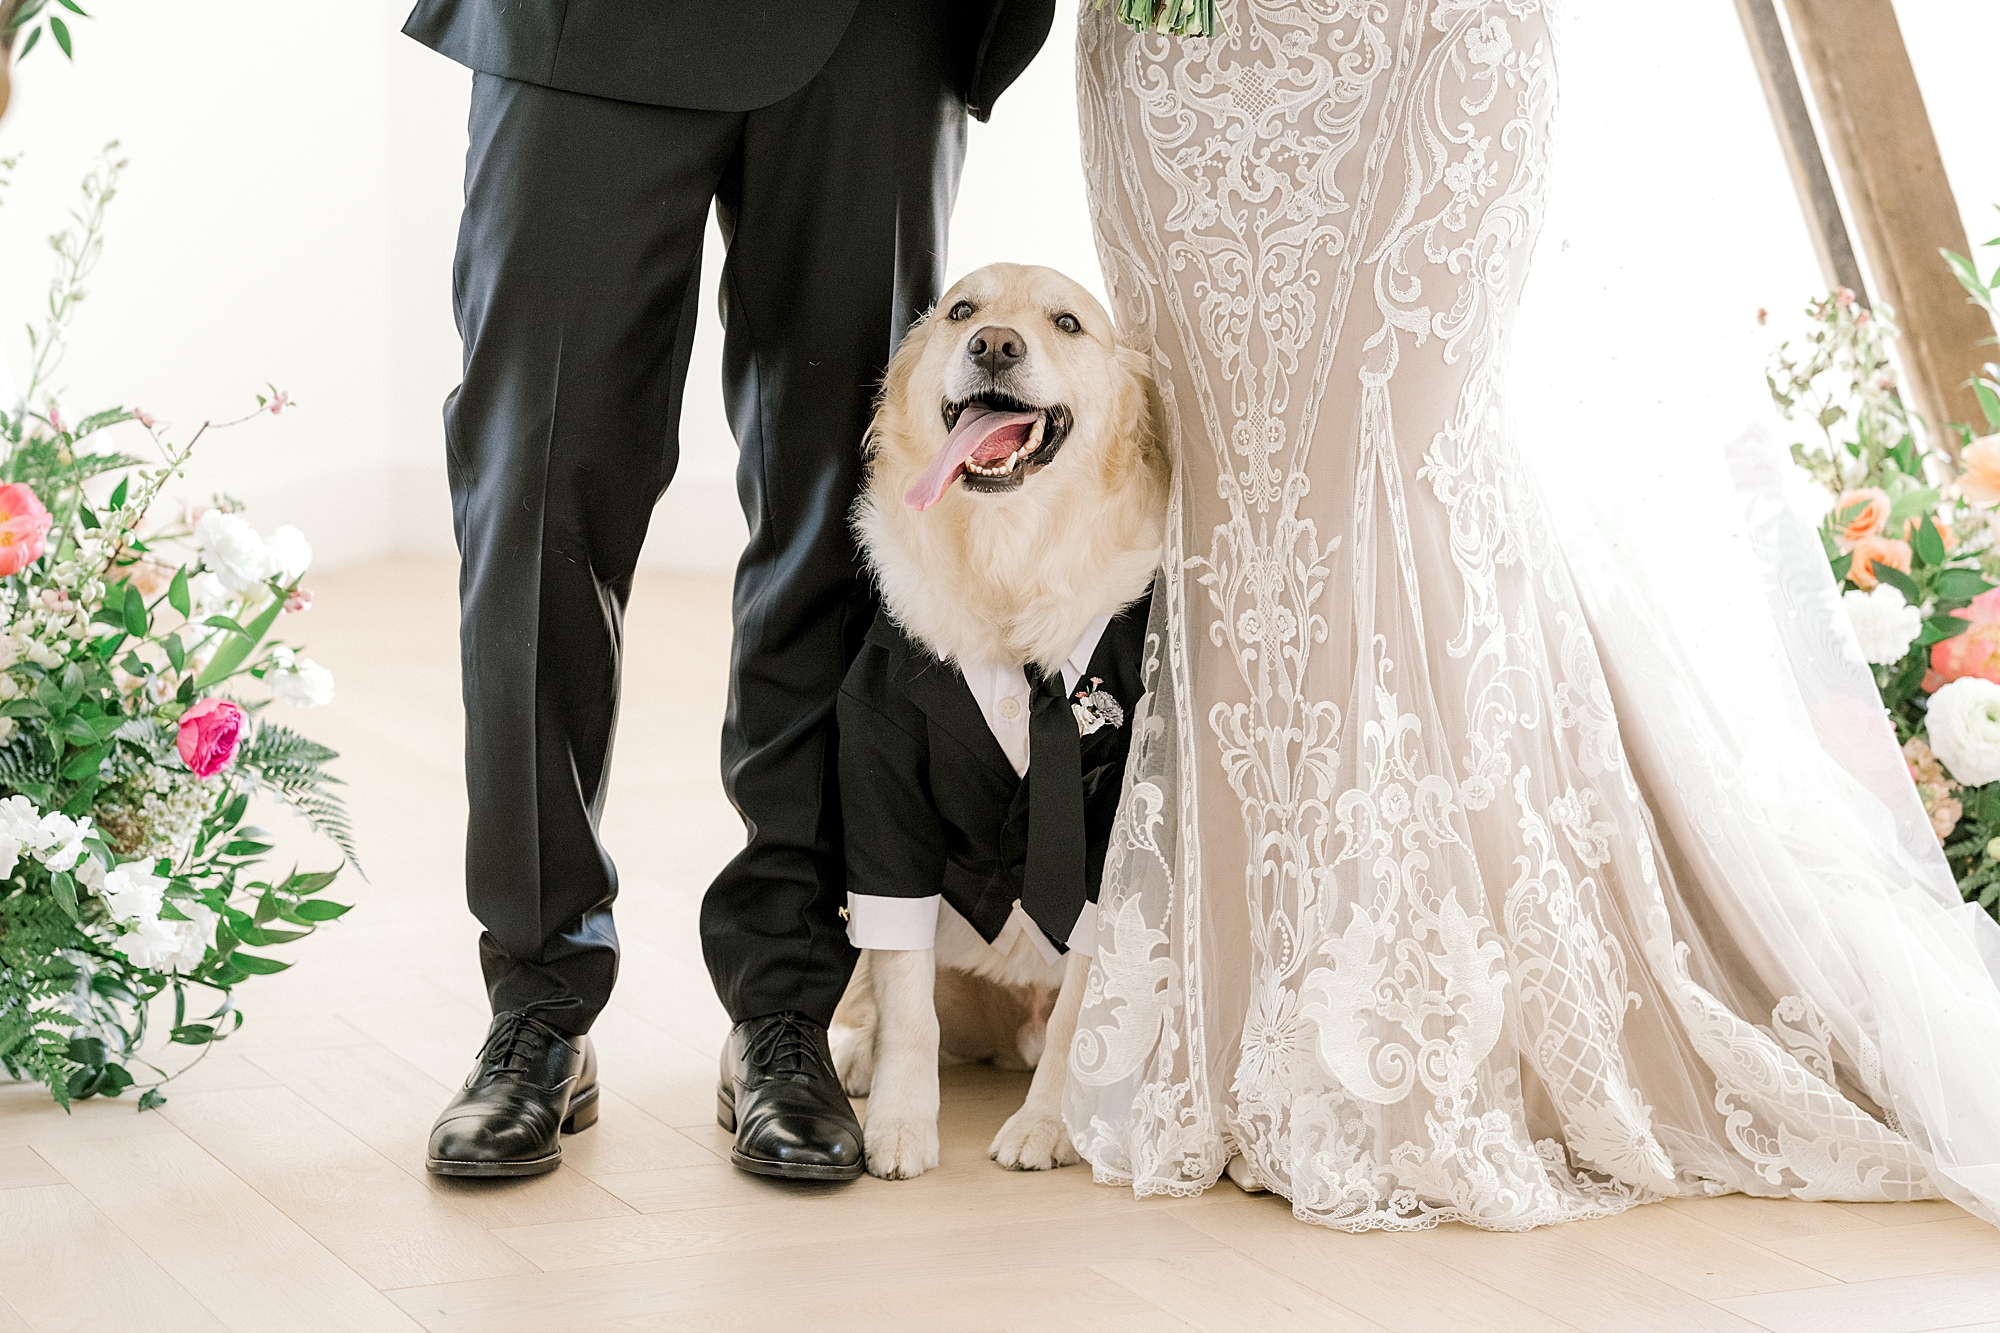 bride and groom stand with golden retriever between them in full suit